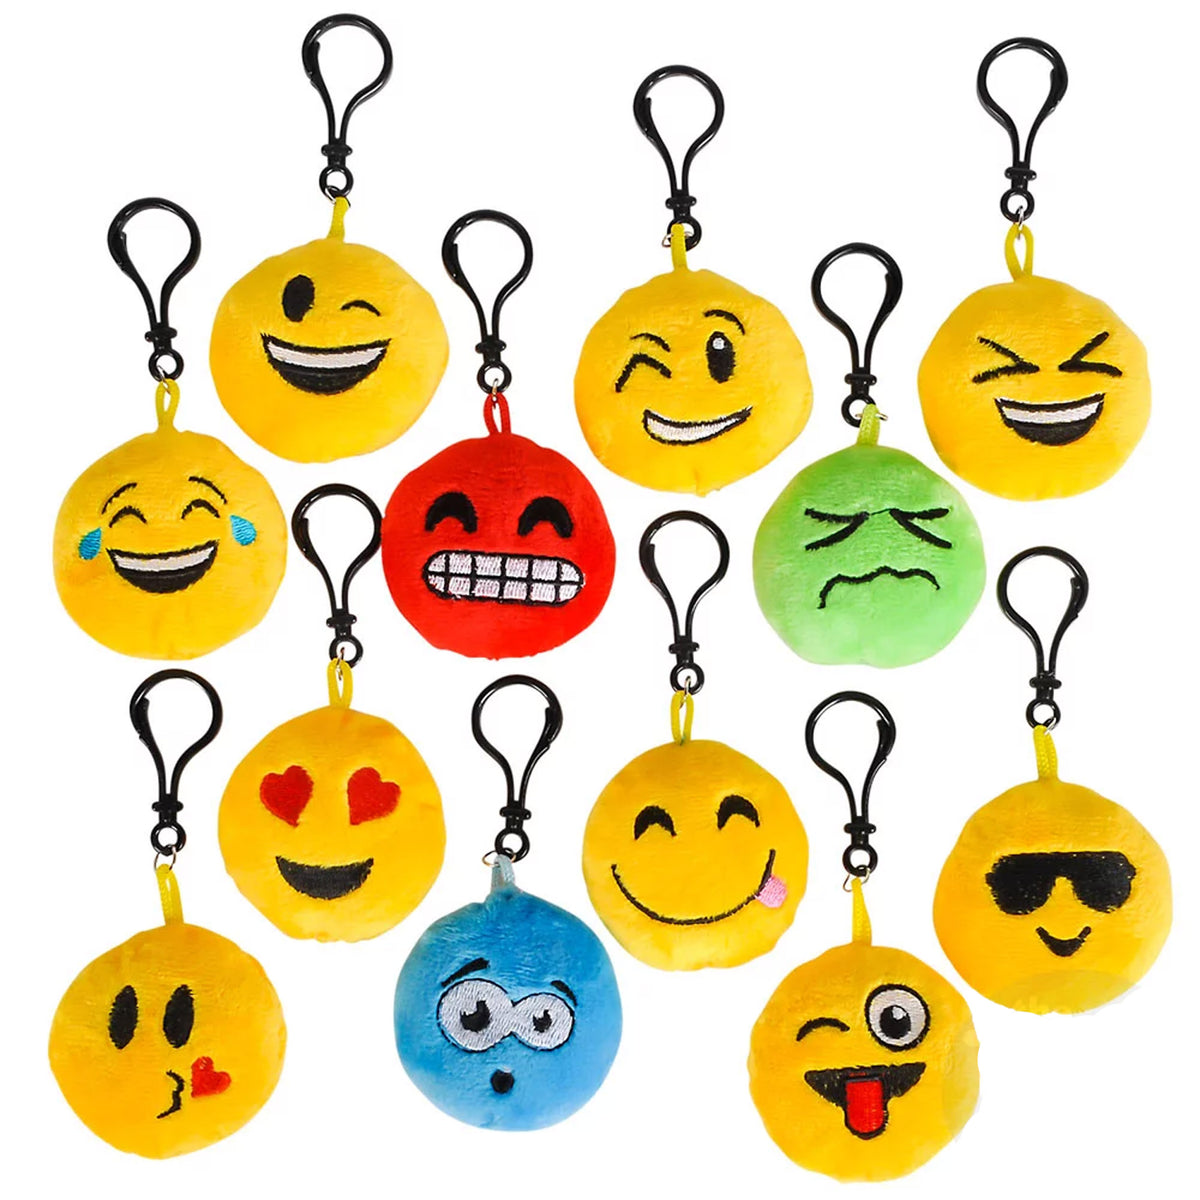 Plush Emoticon Backpack Clip For Kids In Bulk - Assorted